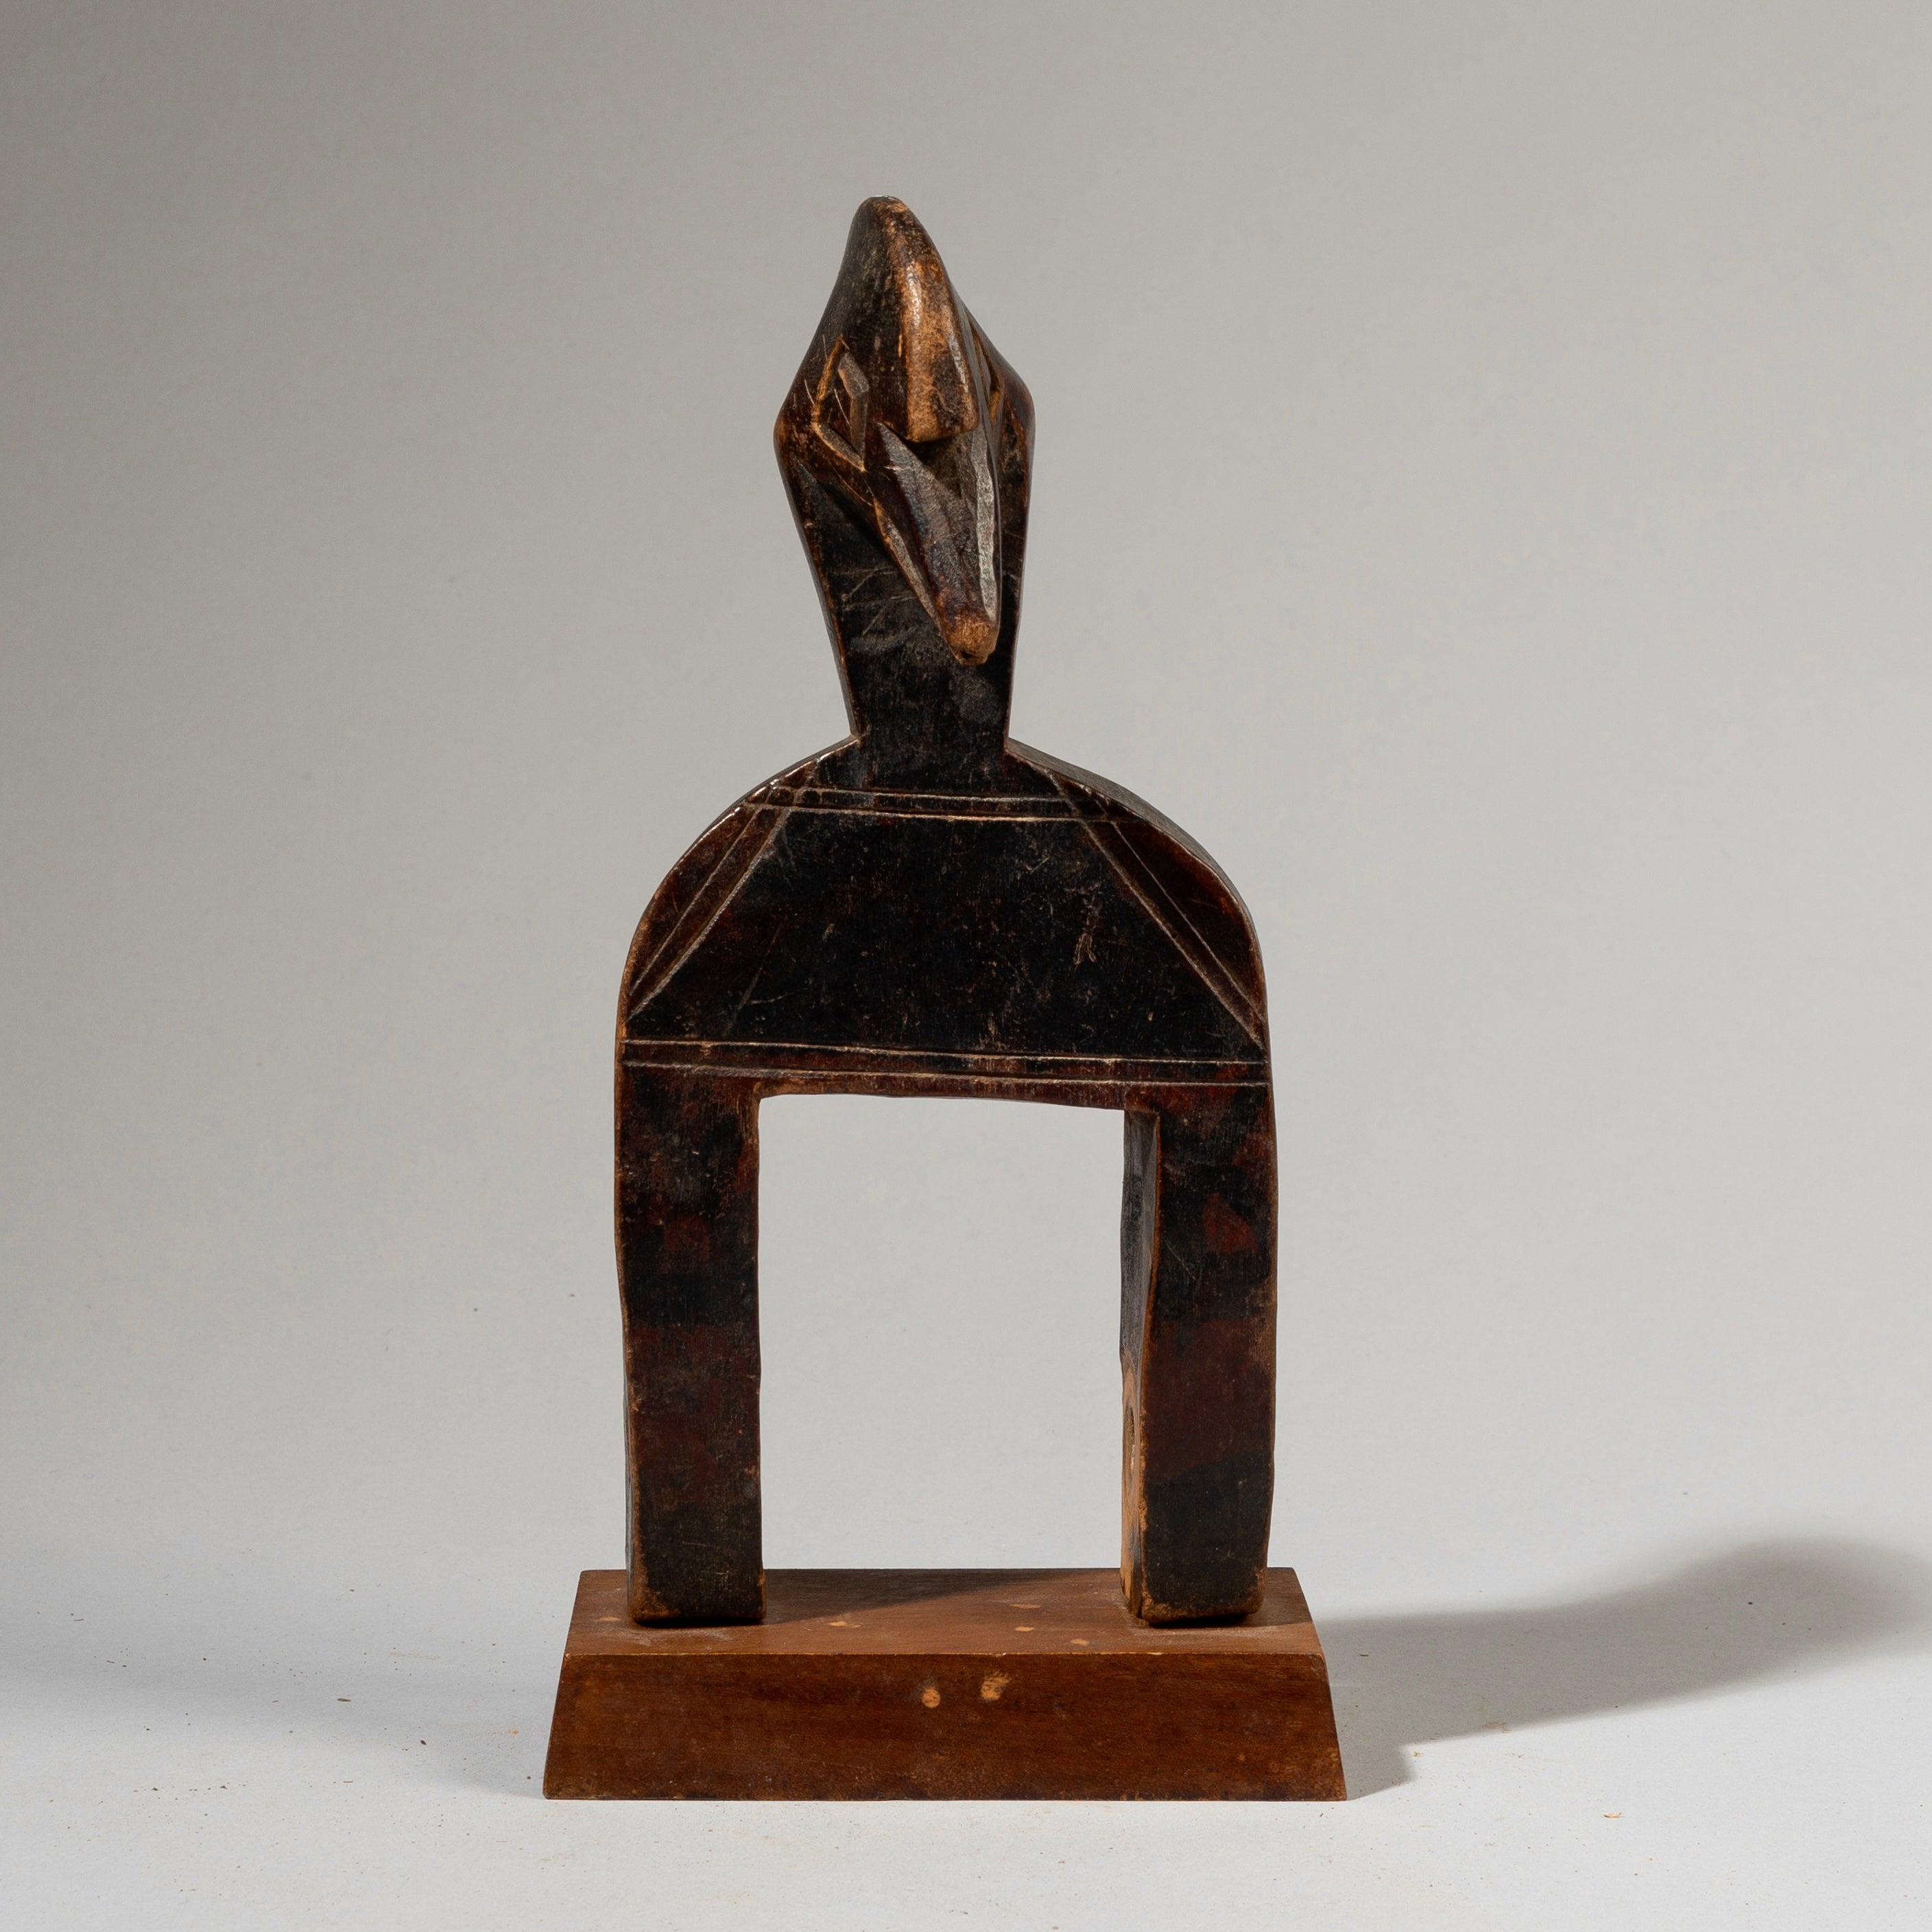 A PRETTY SENUFO HEDDLE PULLEY EX UK COLLECTION, FROM IVORY COAST W. AFRICA ( No 4599)